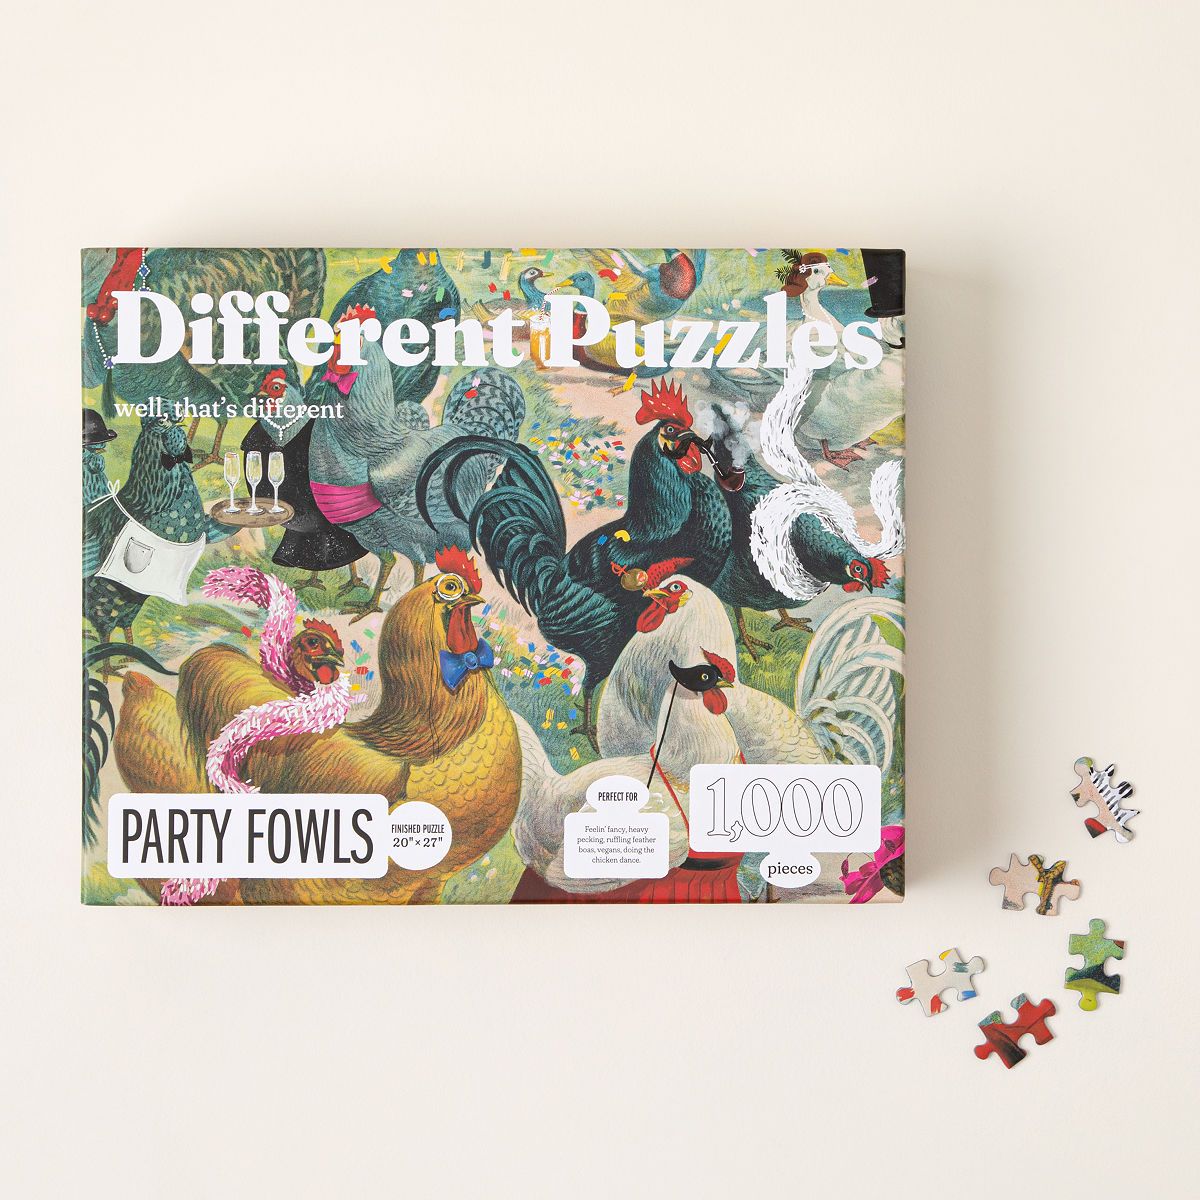 Party Fowl Trick Puzzle | UncommonGoods